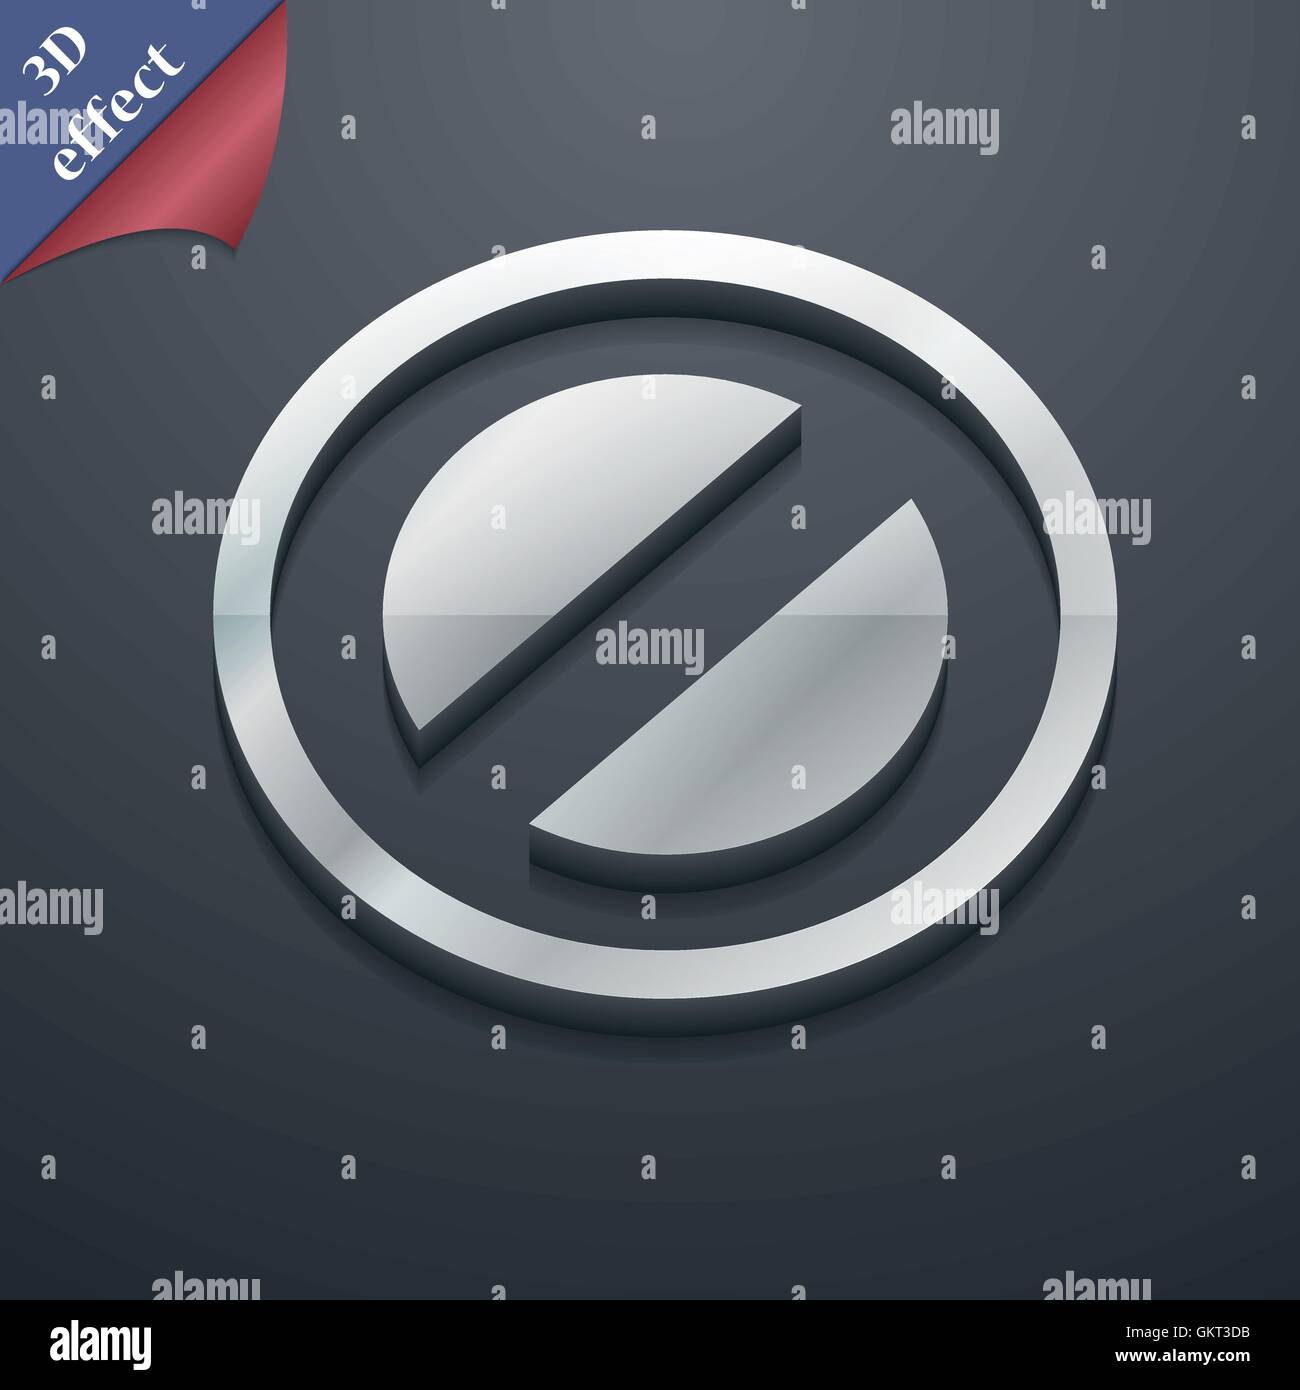 Cancel icon symbol. 3D style. Trendy, modern design with space for your text Vector Stock Vector